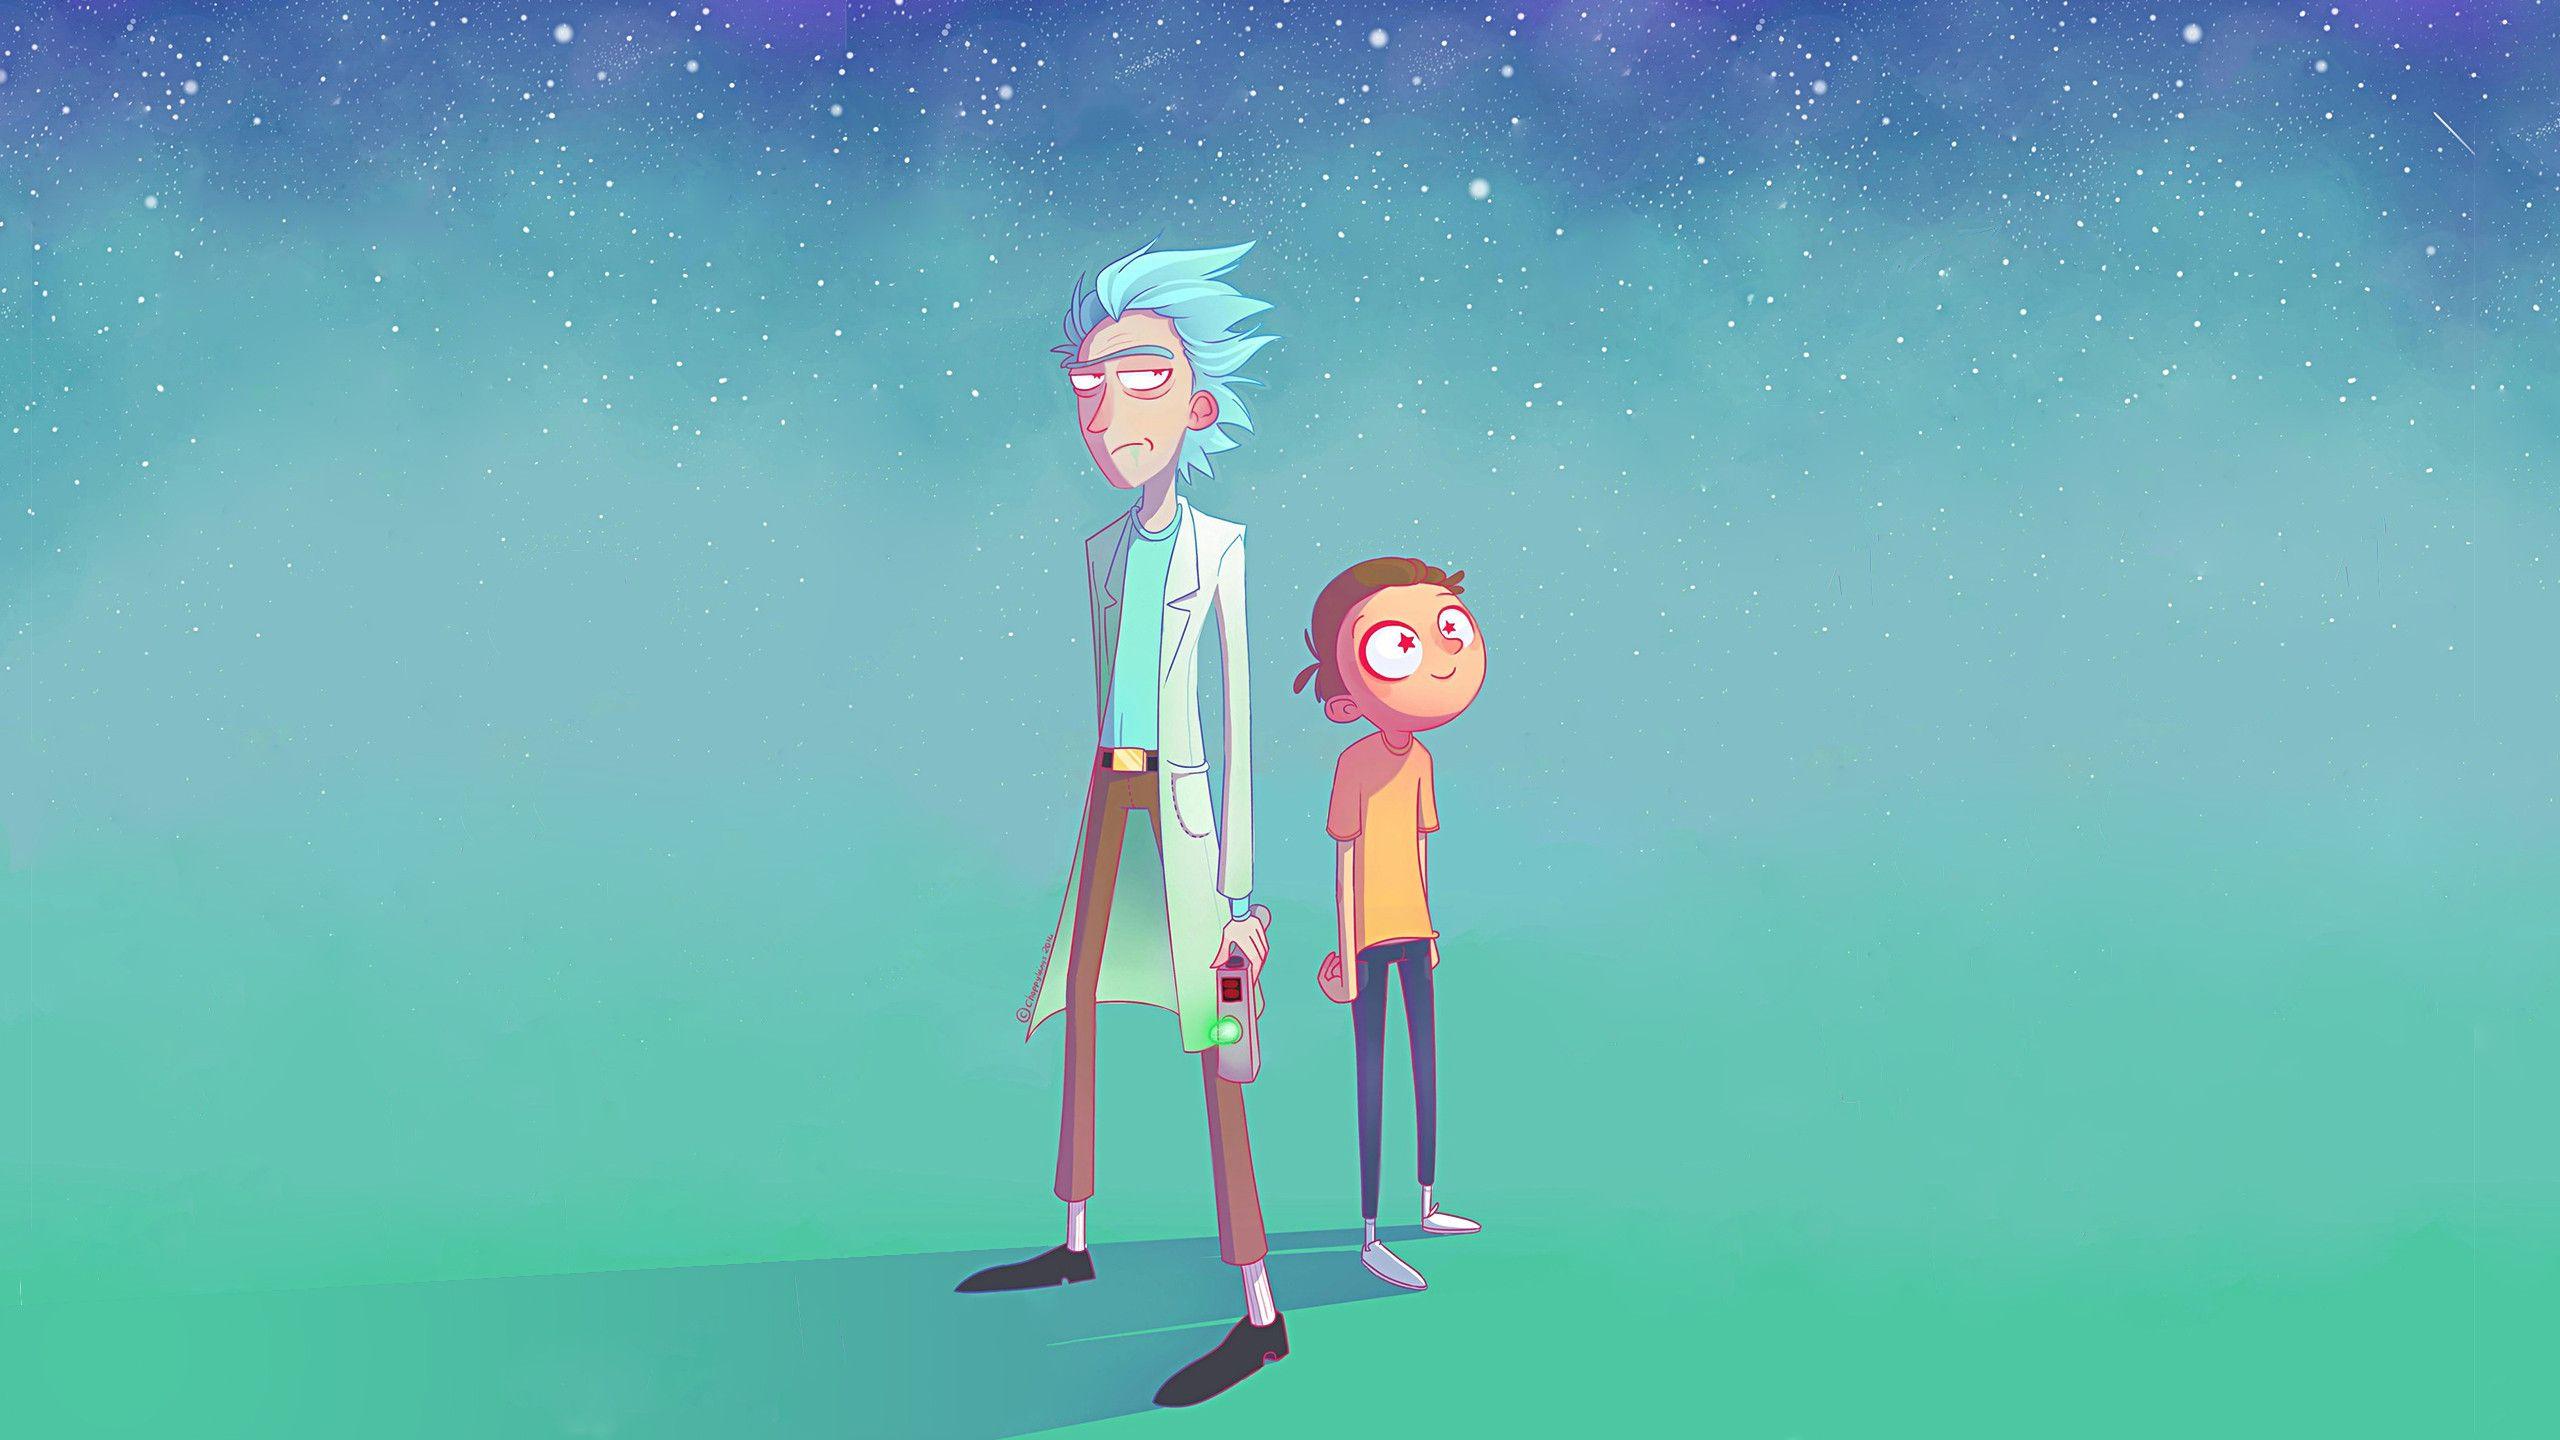 Rick and Morty by Choppywings [2560x1440] #wallpaper. Rick